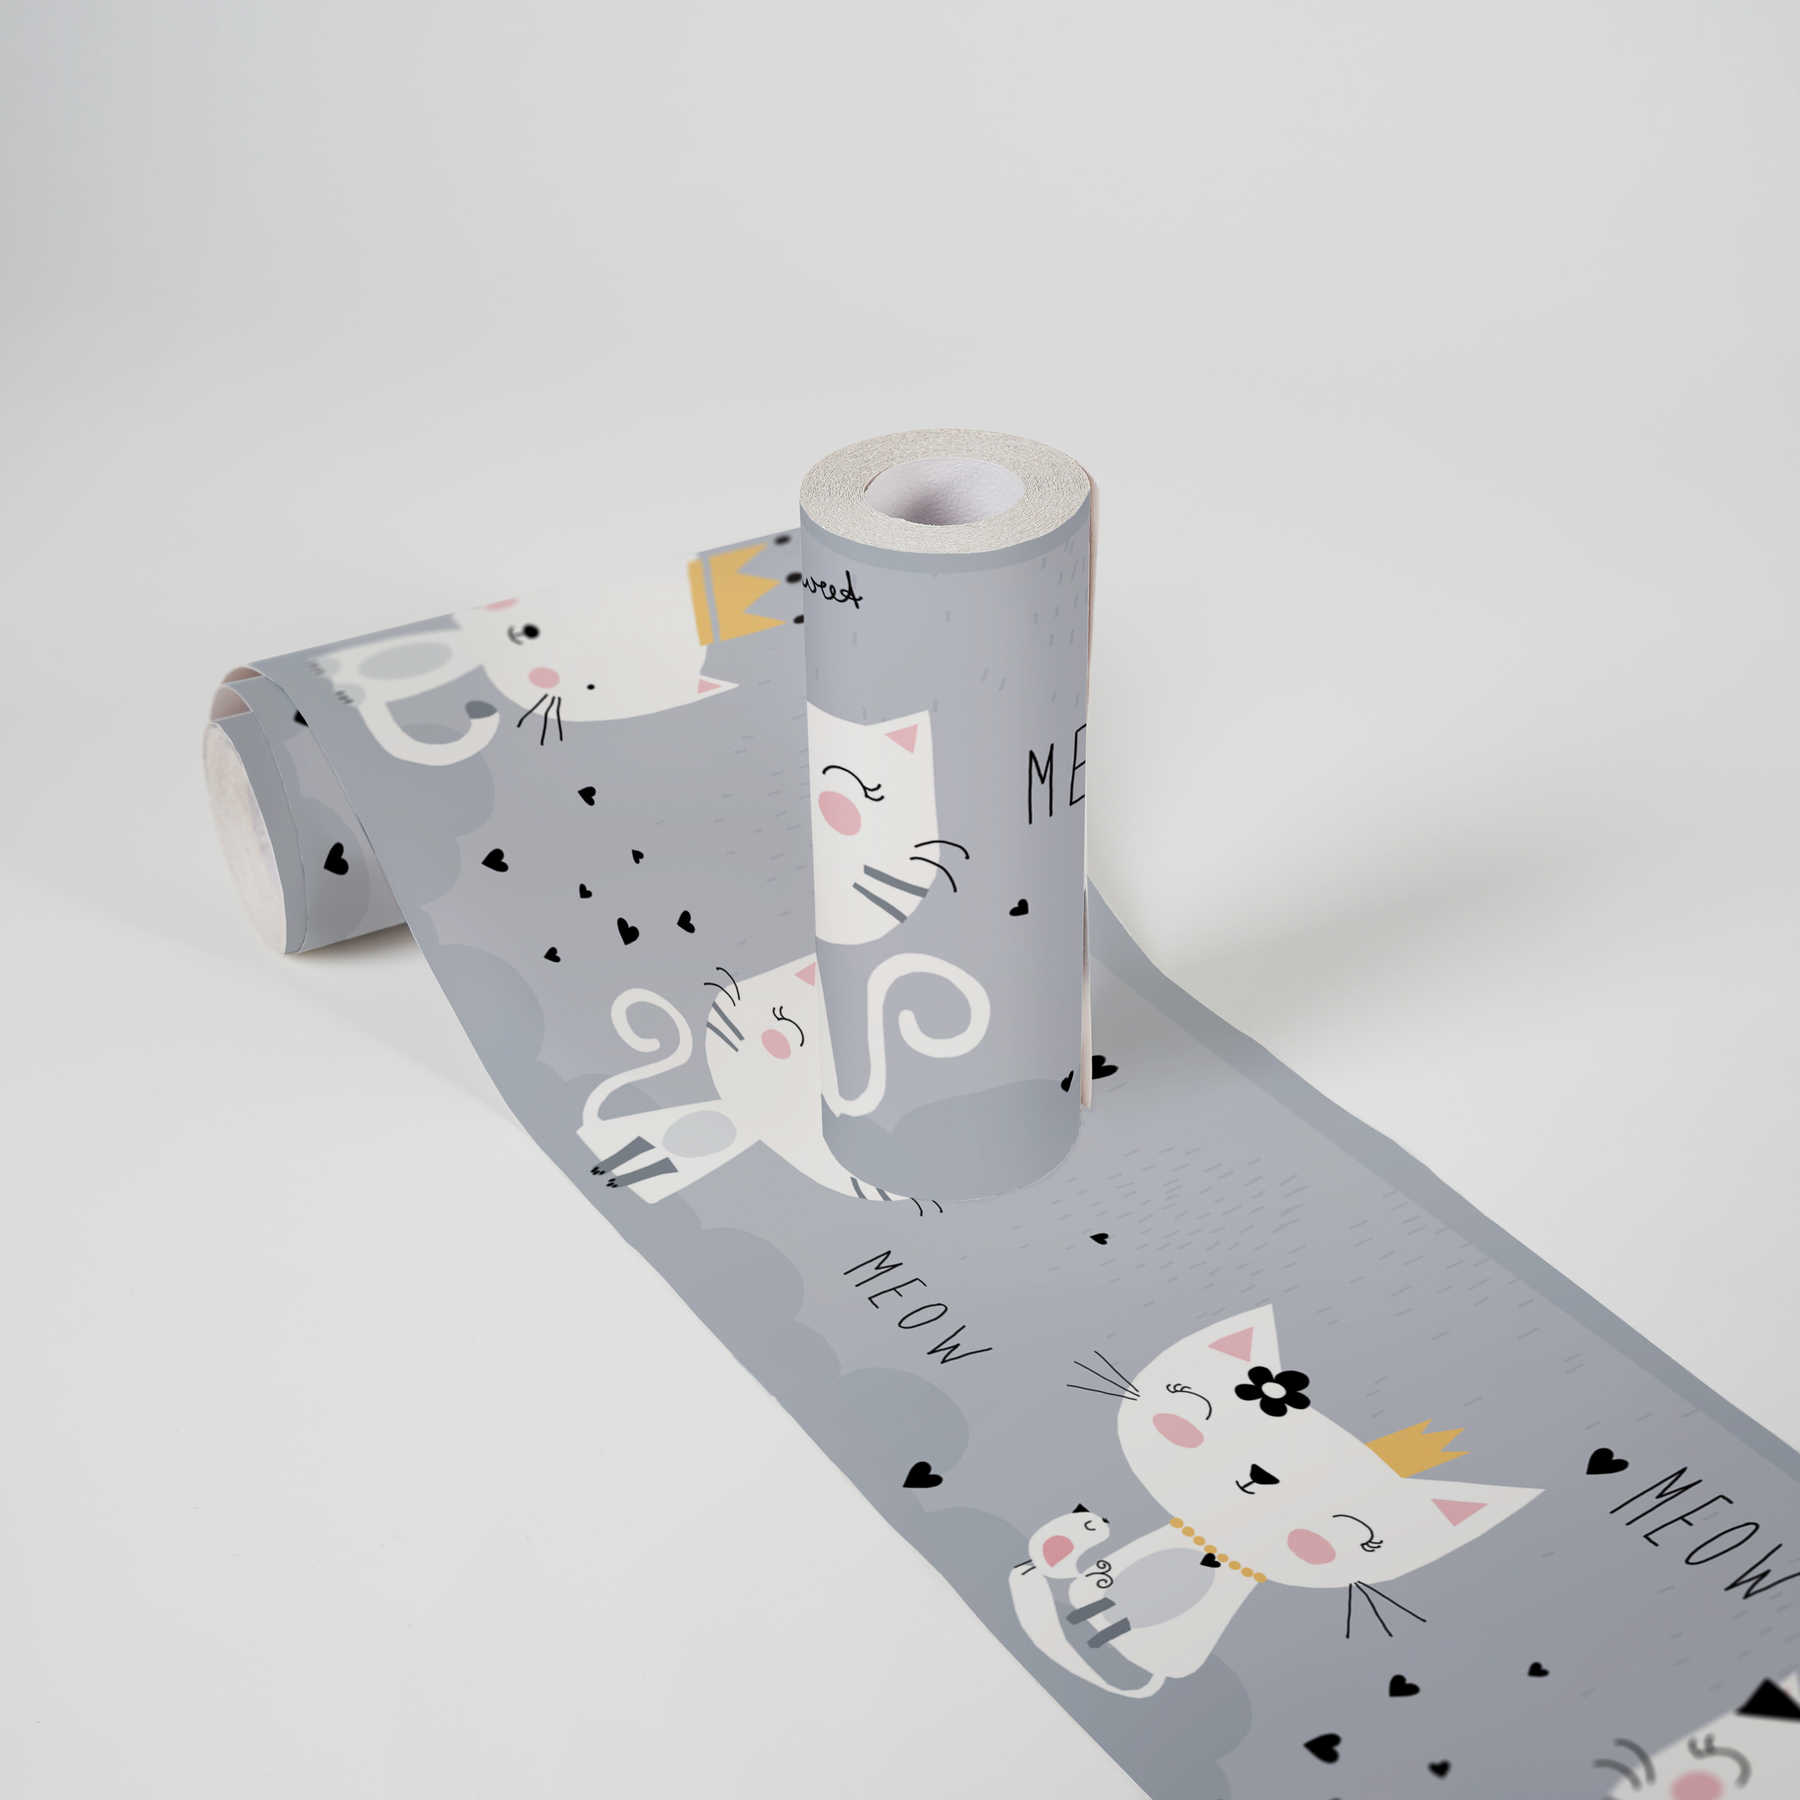             Cats border for girls room "Royal cats" - grey, yellow, pink
        